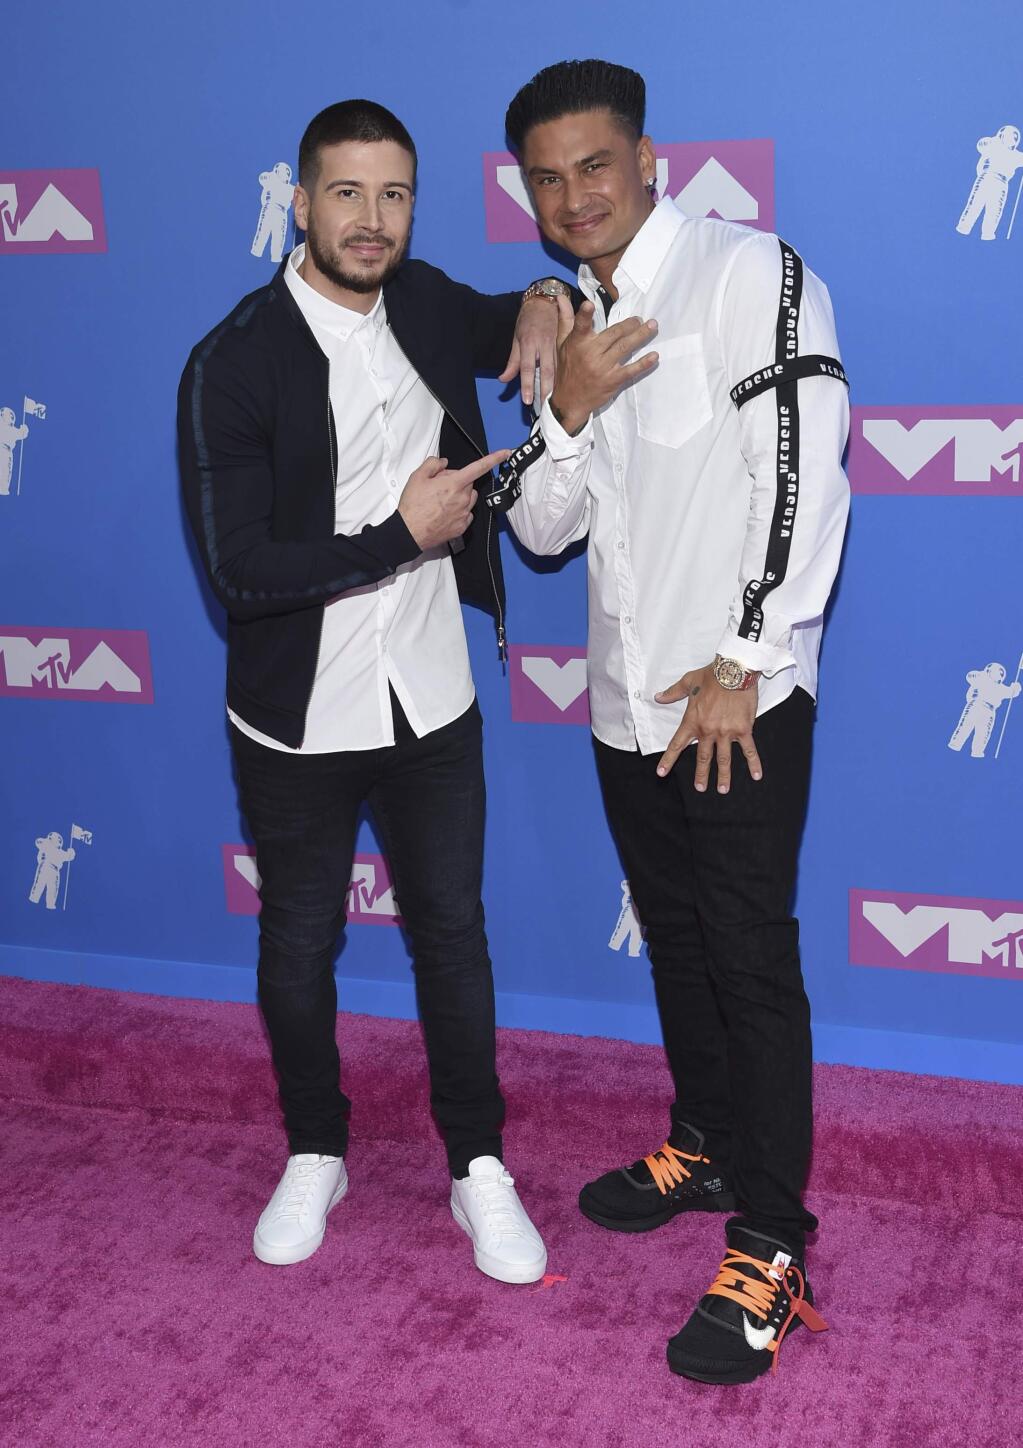 Vinny Guadagnino, left, and Paul 'DJ Pauly D' DelVecchio arrive at the MTV Video Music Awards at Radio City Music Hall on Monday, Aug. 20, 2018, in New York. (Photo by Evan Agostini/Invision/AP)